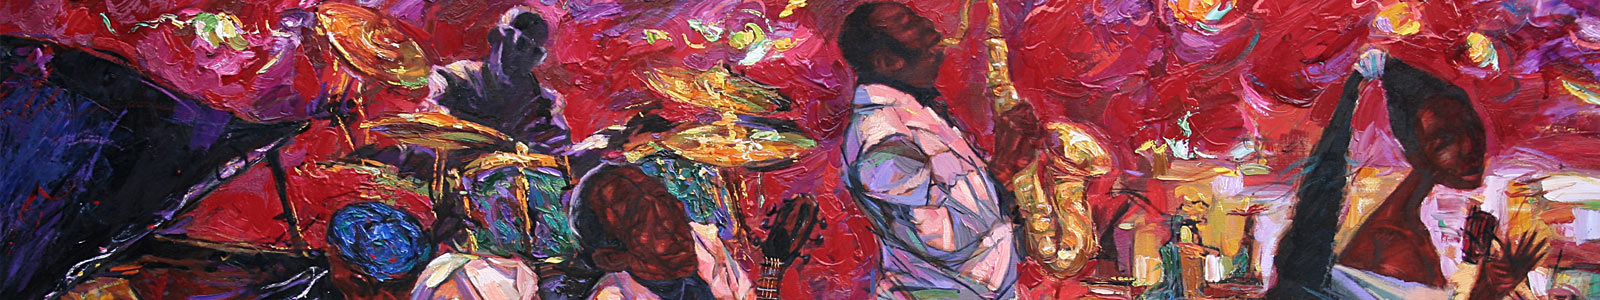 Jazz Musicians Oil Painting